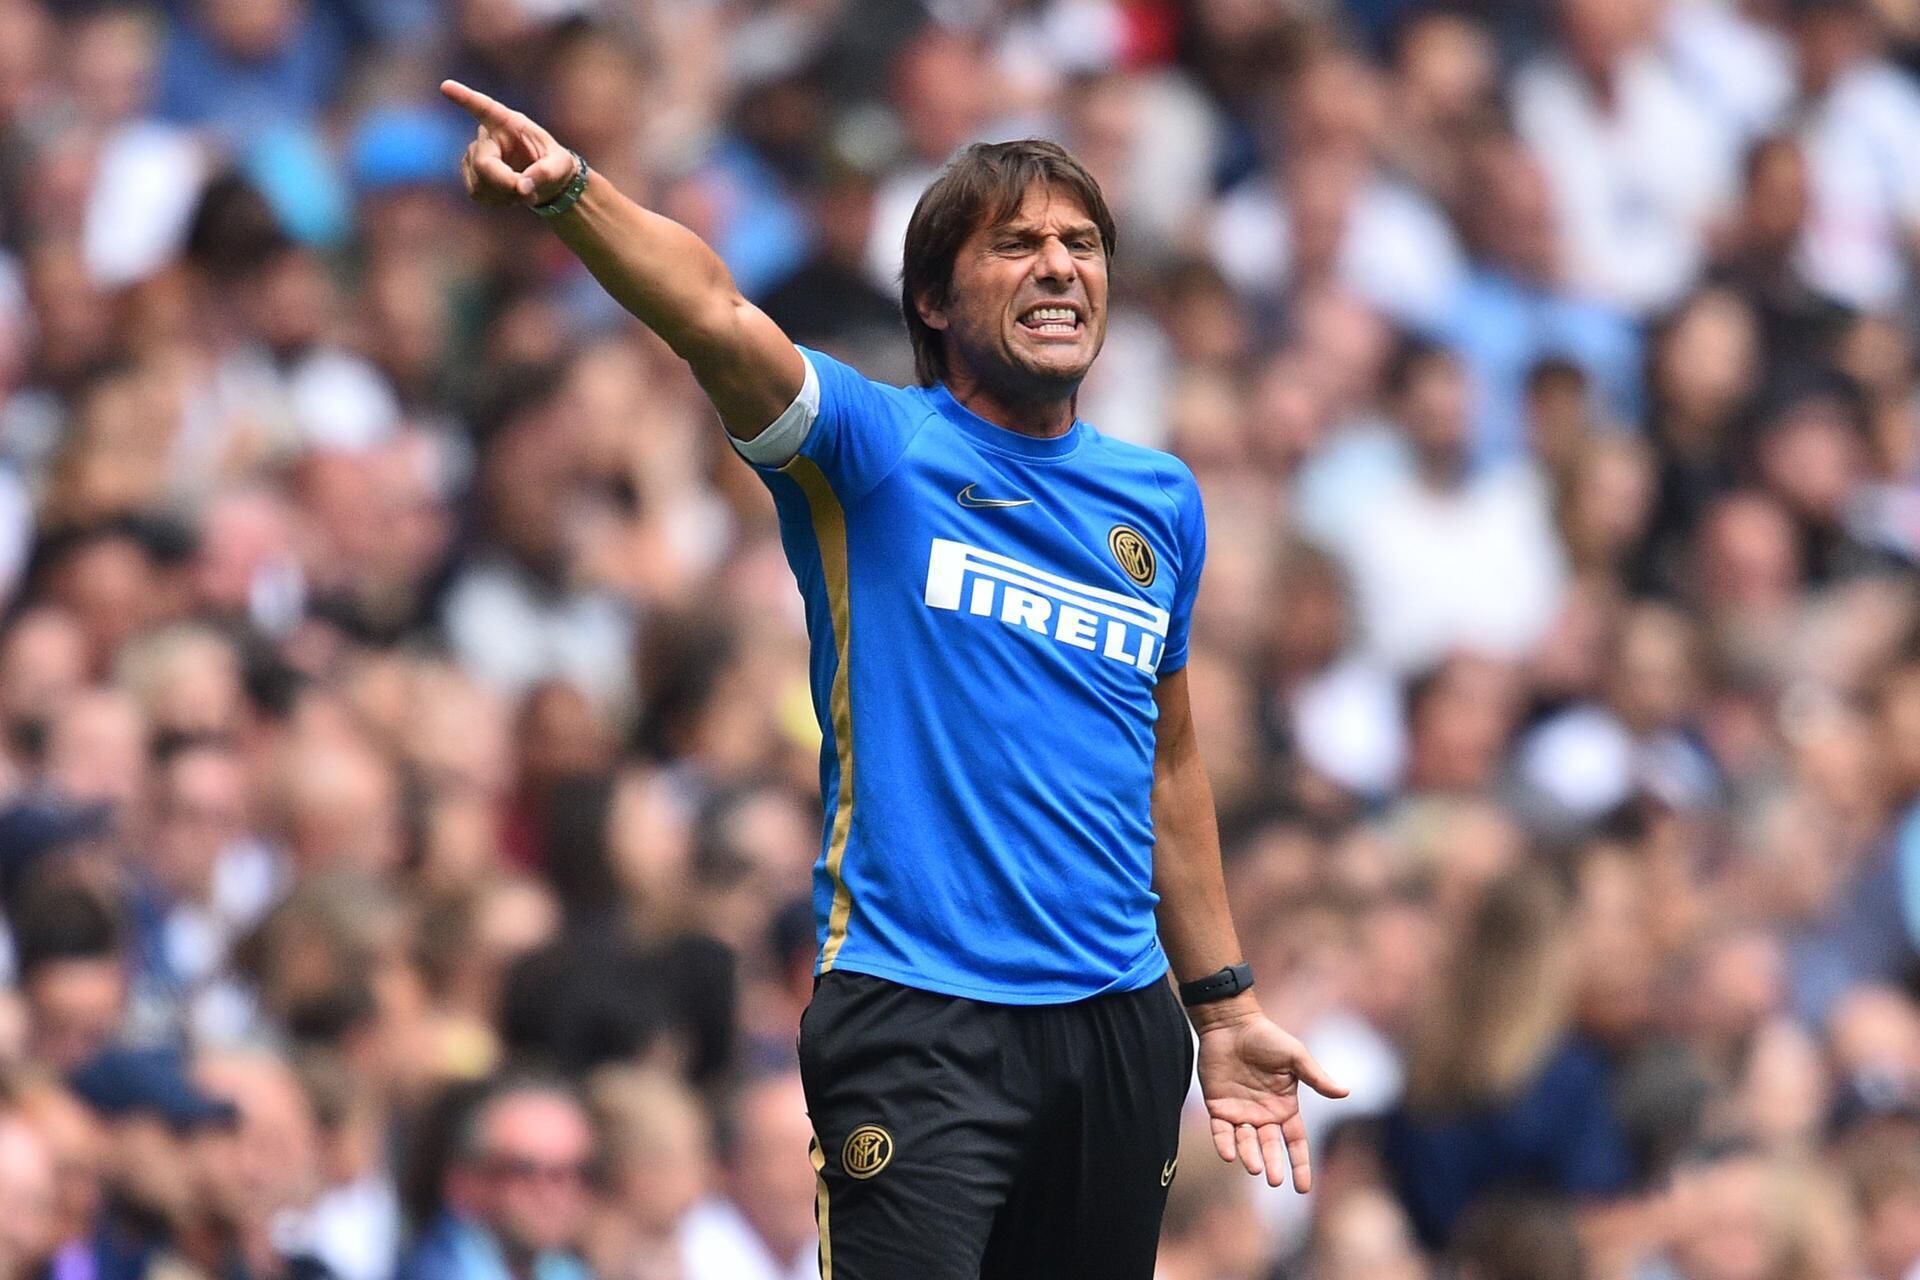 The making of Antonio Conte: a journey from Lecce to Chelsea